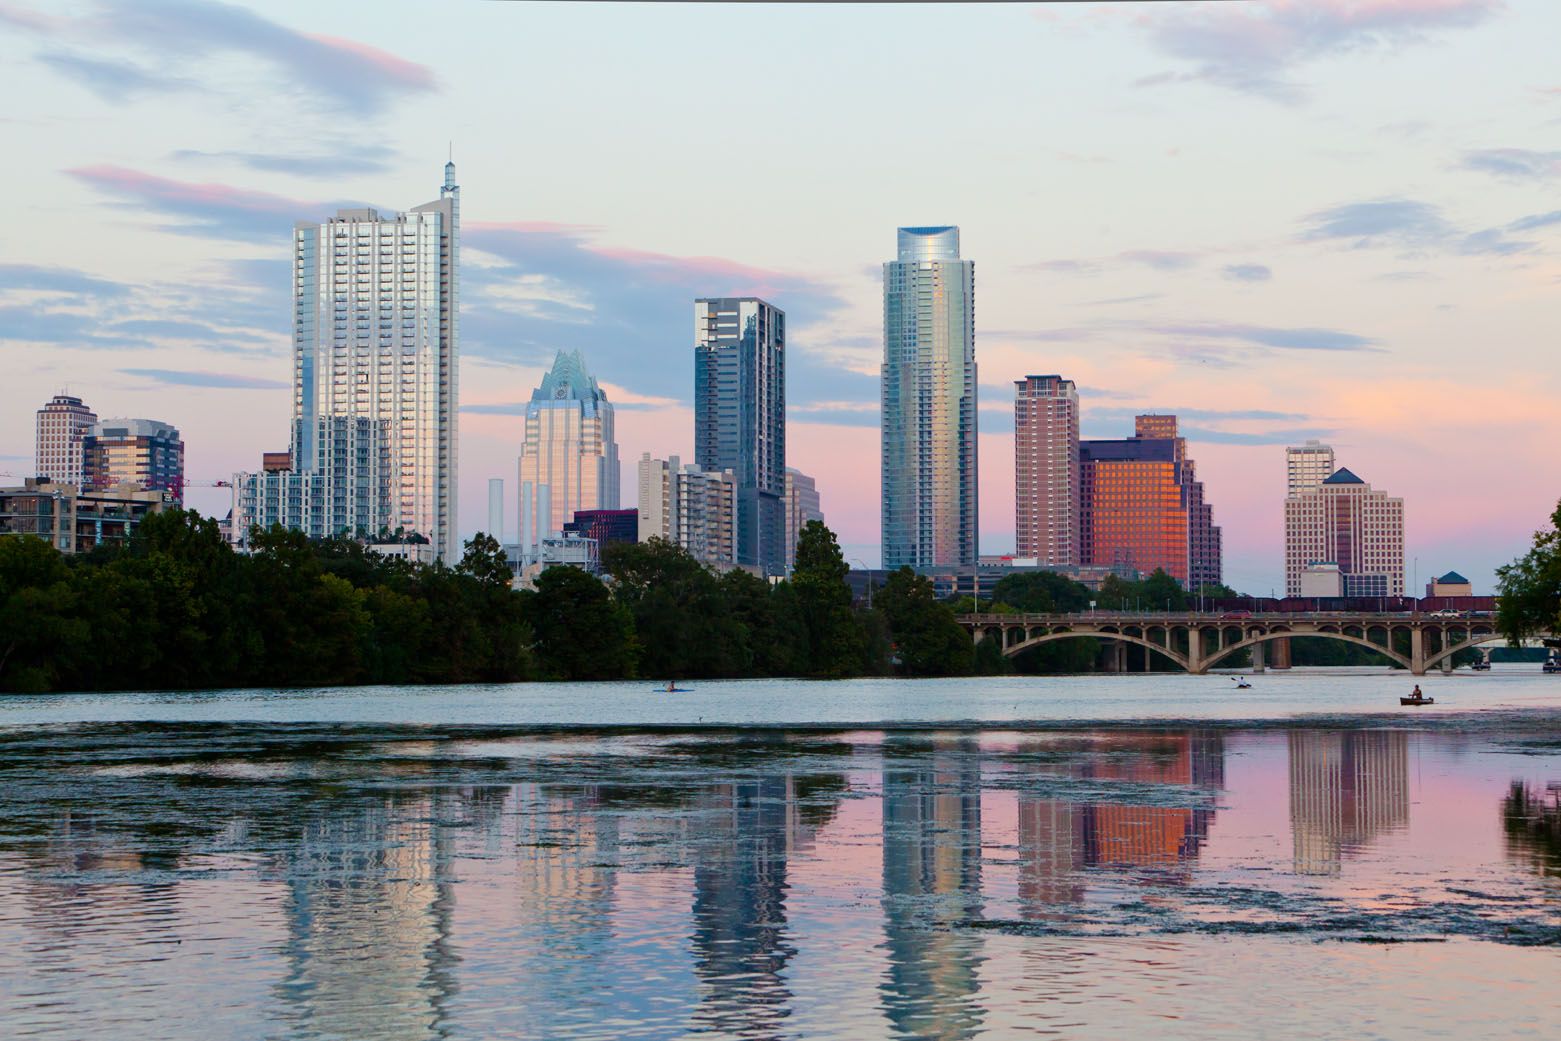 We are an Austin, Texas-based private equity firm that partners with management teams to grow outstanding middle-market companies.